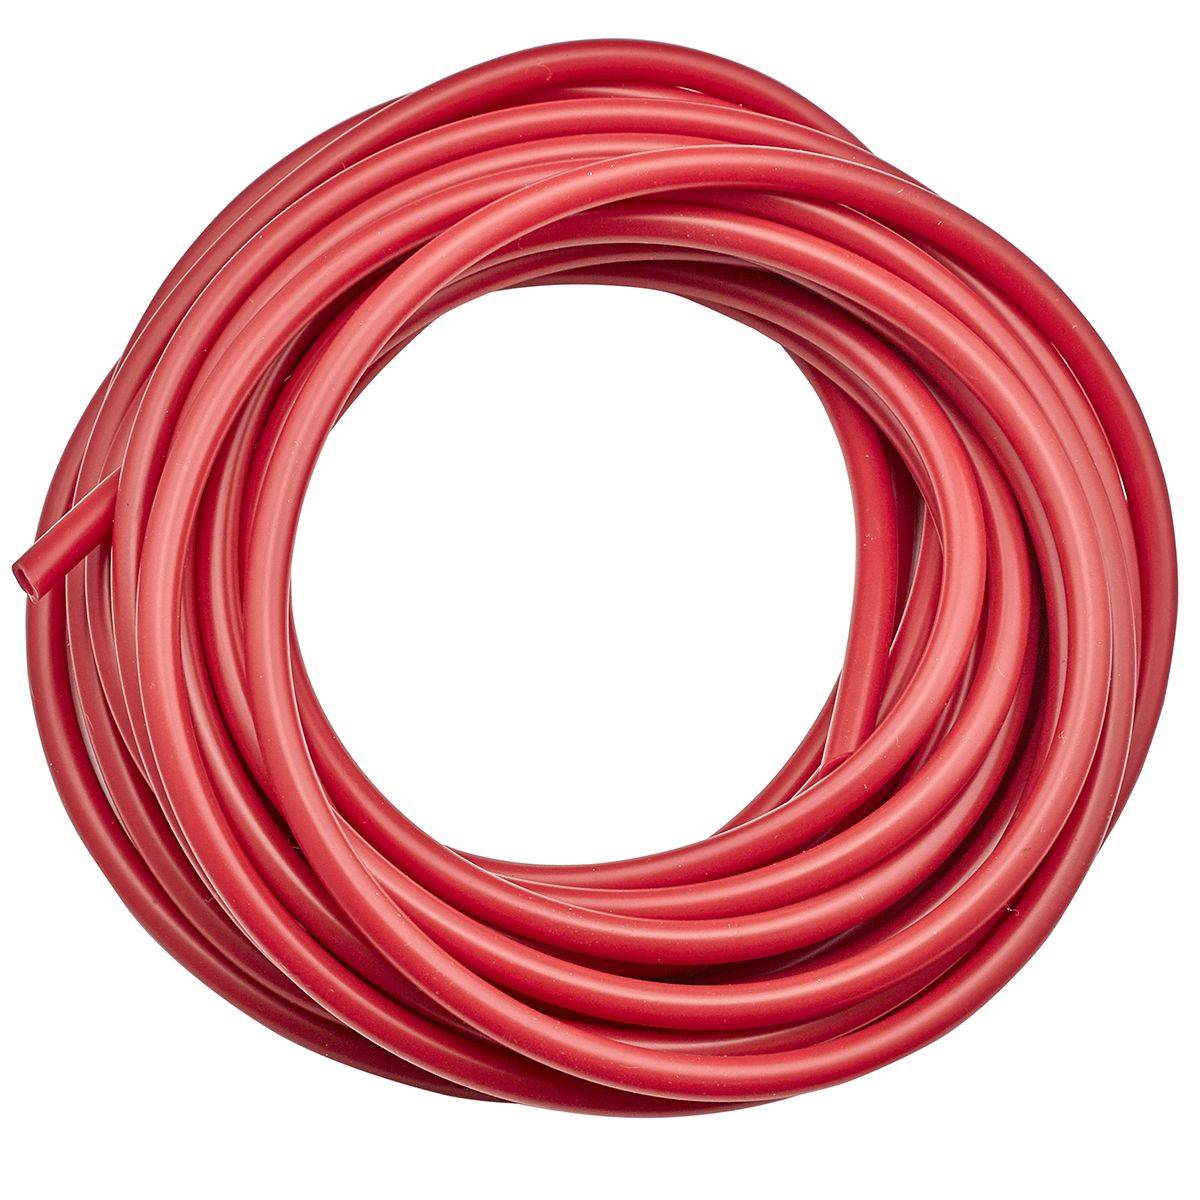 25 Ft Heavy-Duty Silicone Dosing Pump Tubing - Red - Simplicity